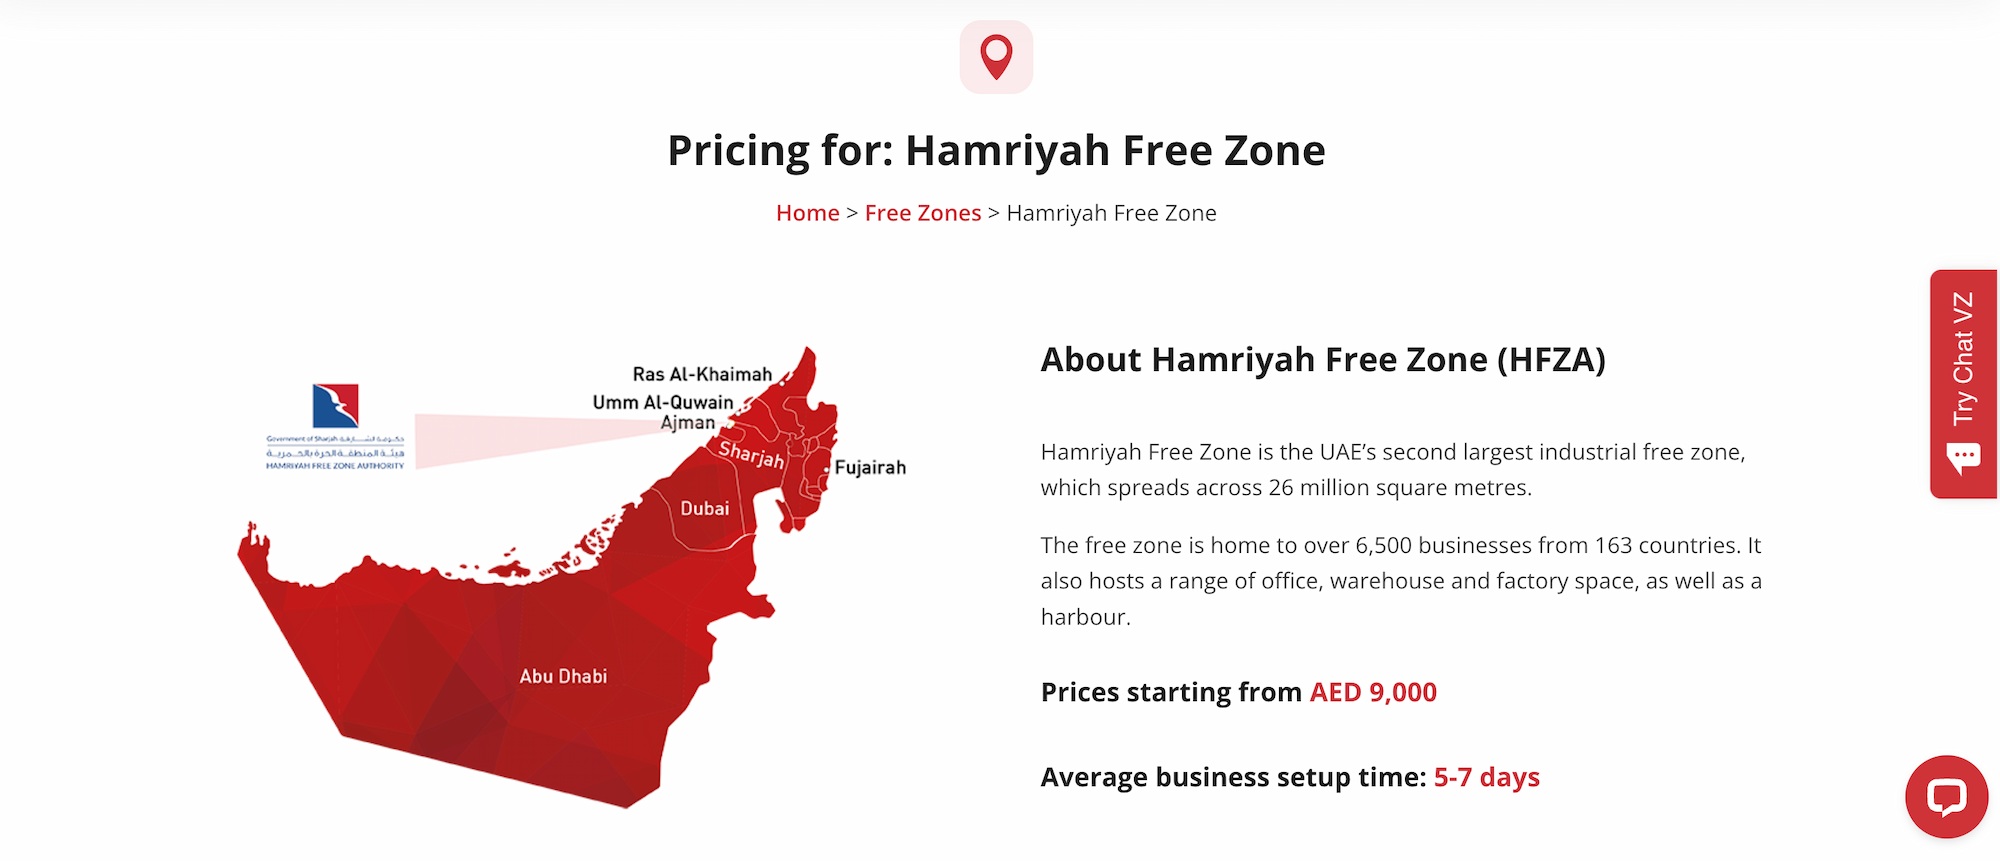 An overview and pricing information of the Hamriyah Free Zone.